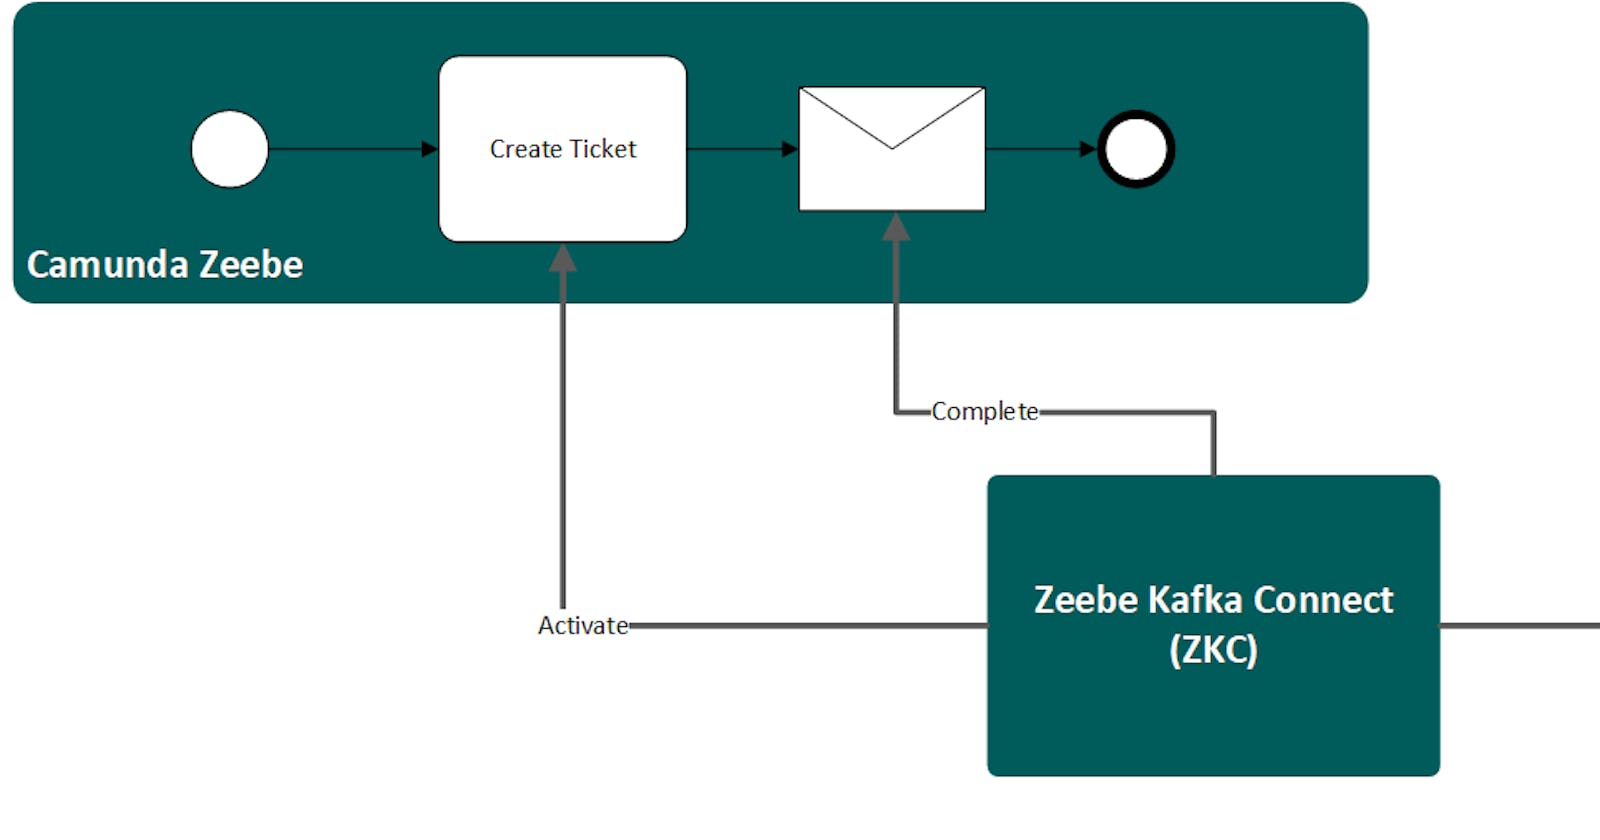 Workflow engine and microservice asynchronous interaction with Kafka Connect